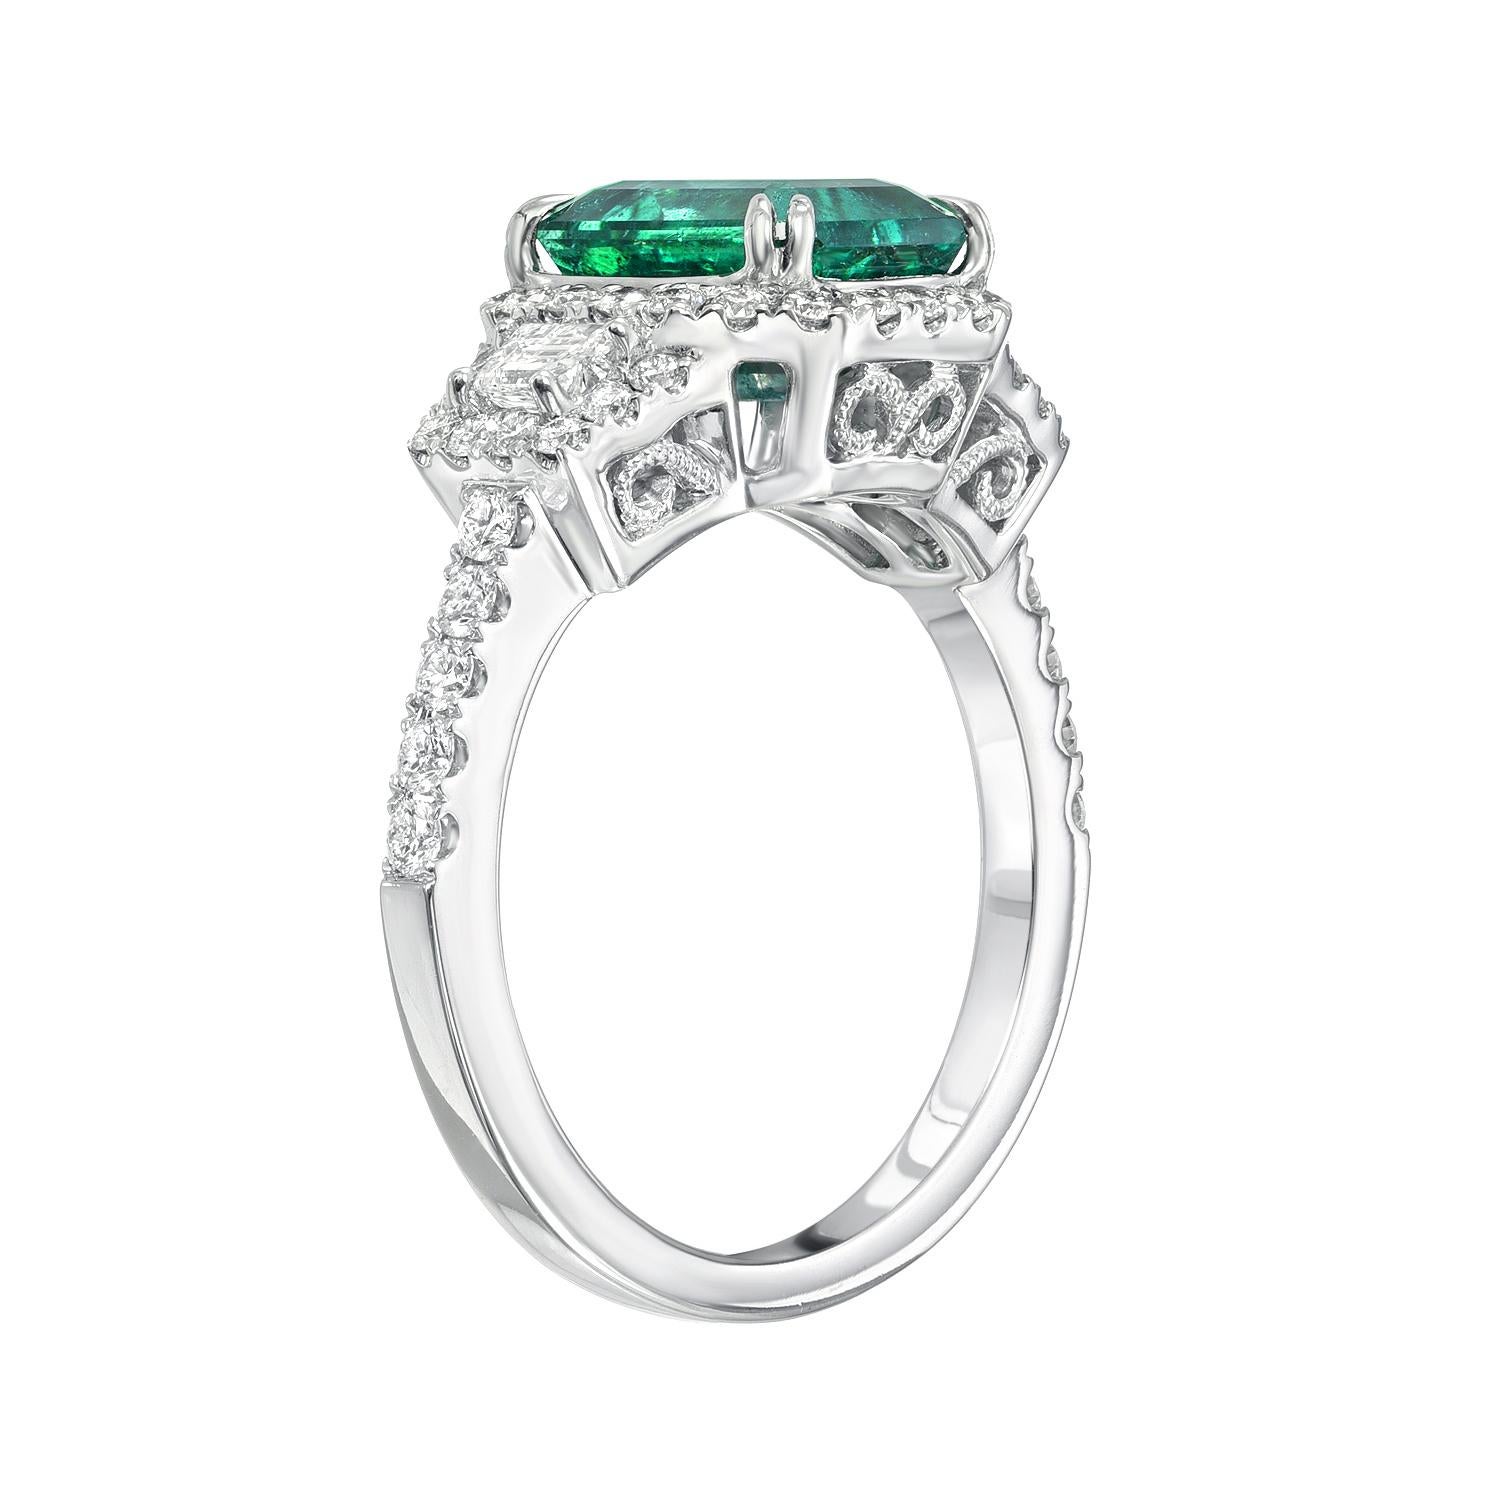 Classic 2.16 carat emerald-cut Emerald, 18K white gold ring, flanked by a pair of trapezoid diamonds and round brilliant diamonds weighing a total of 0.80 carats. 
Ring size 6.5 Resizing is complementary upon request.
Crafted by extremely skilled